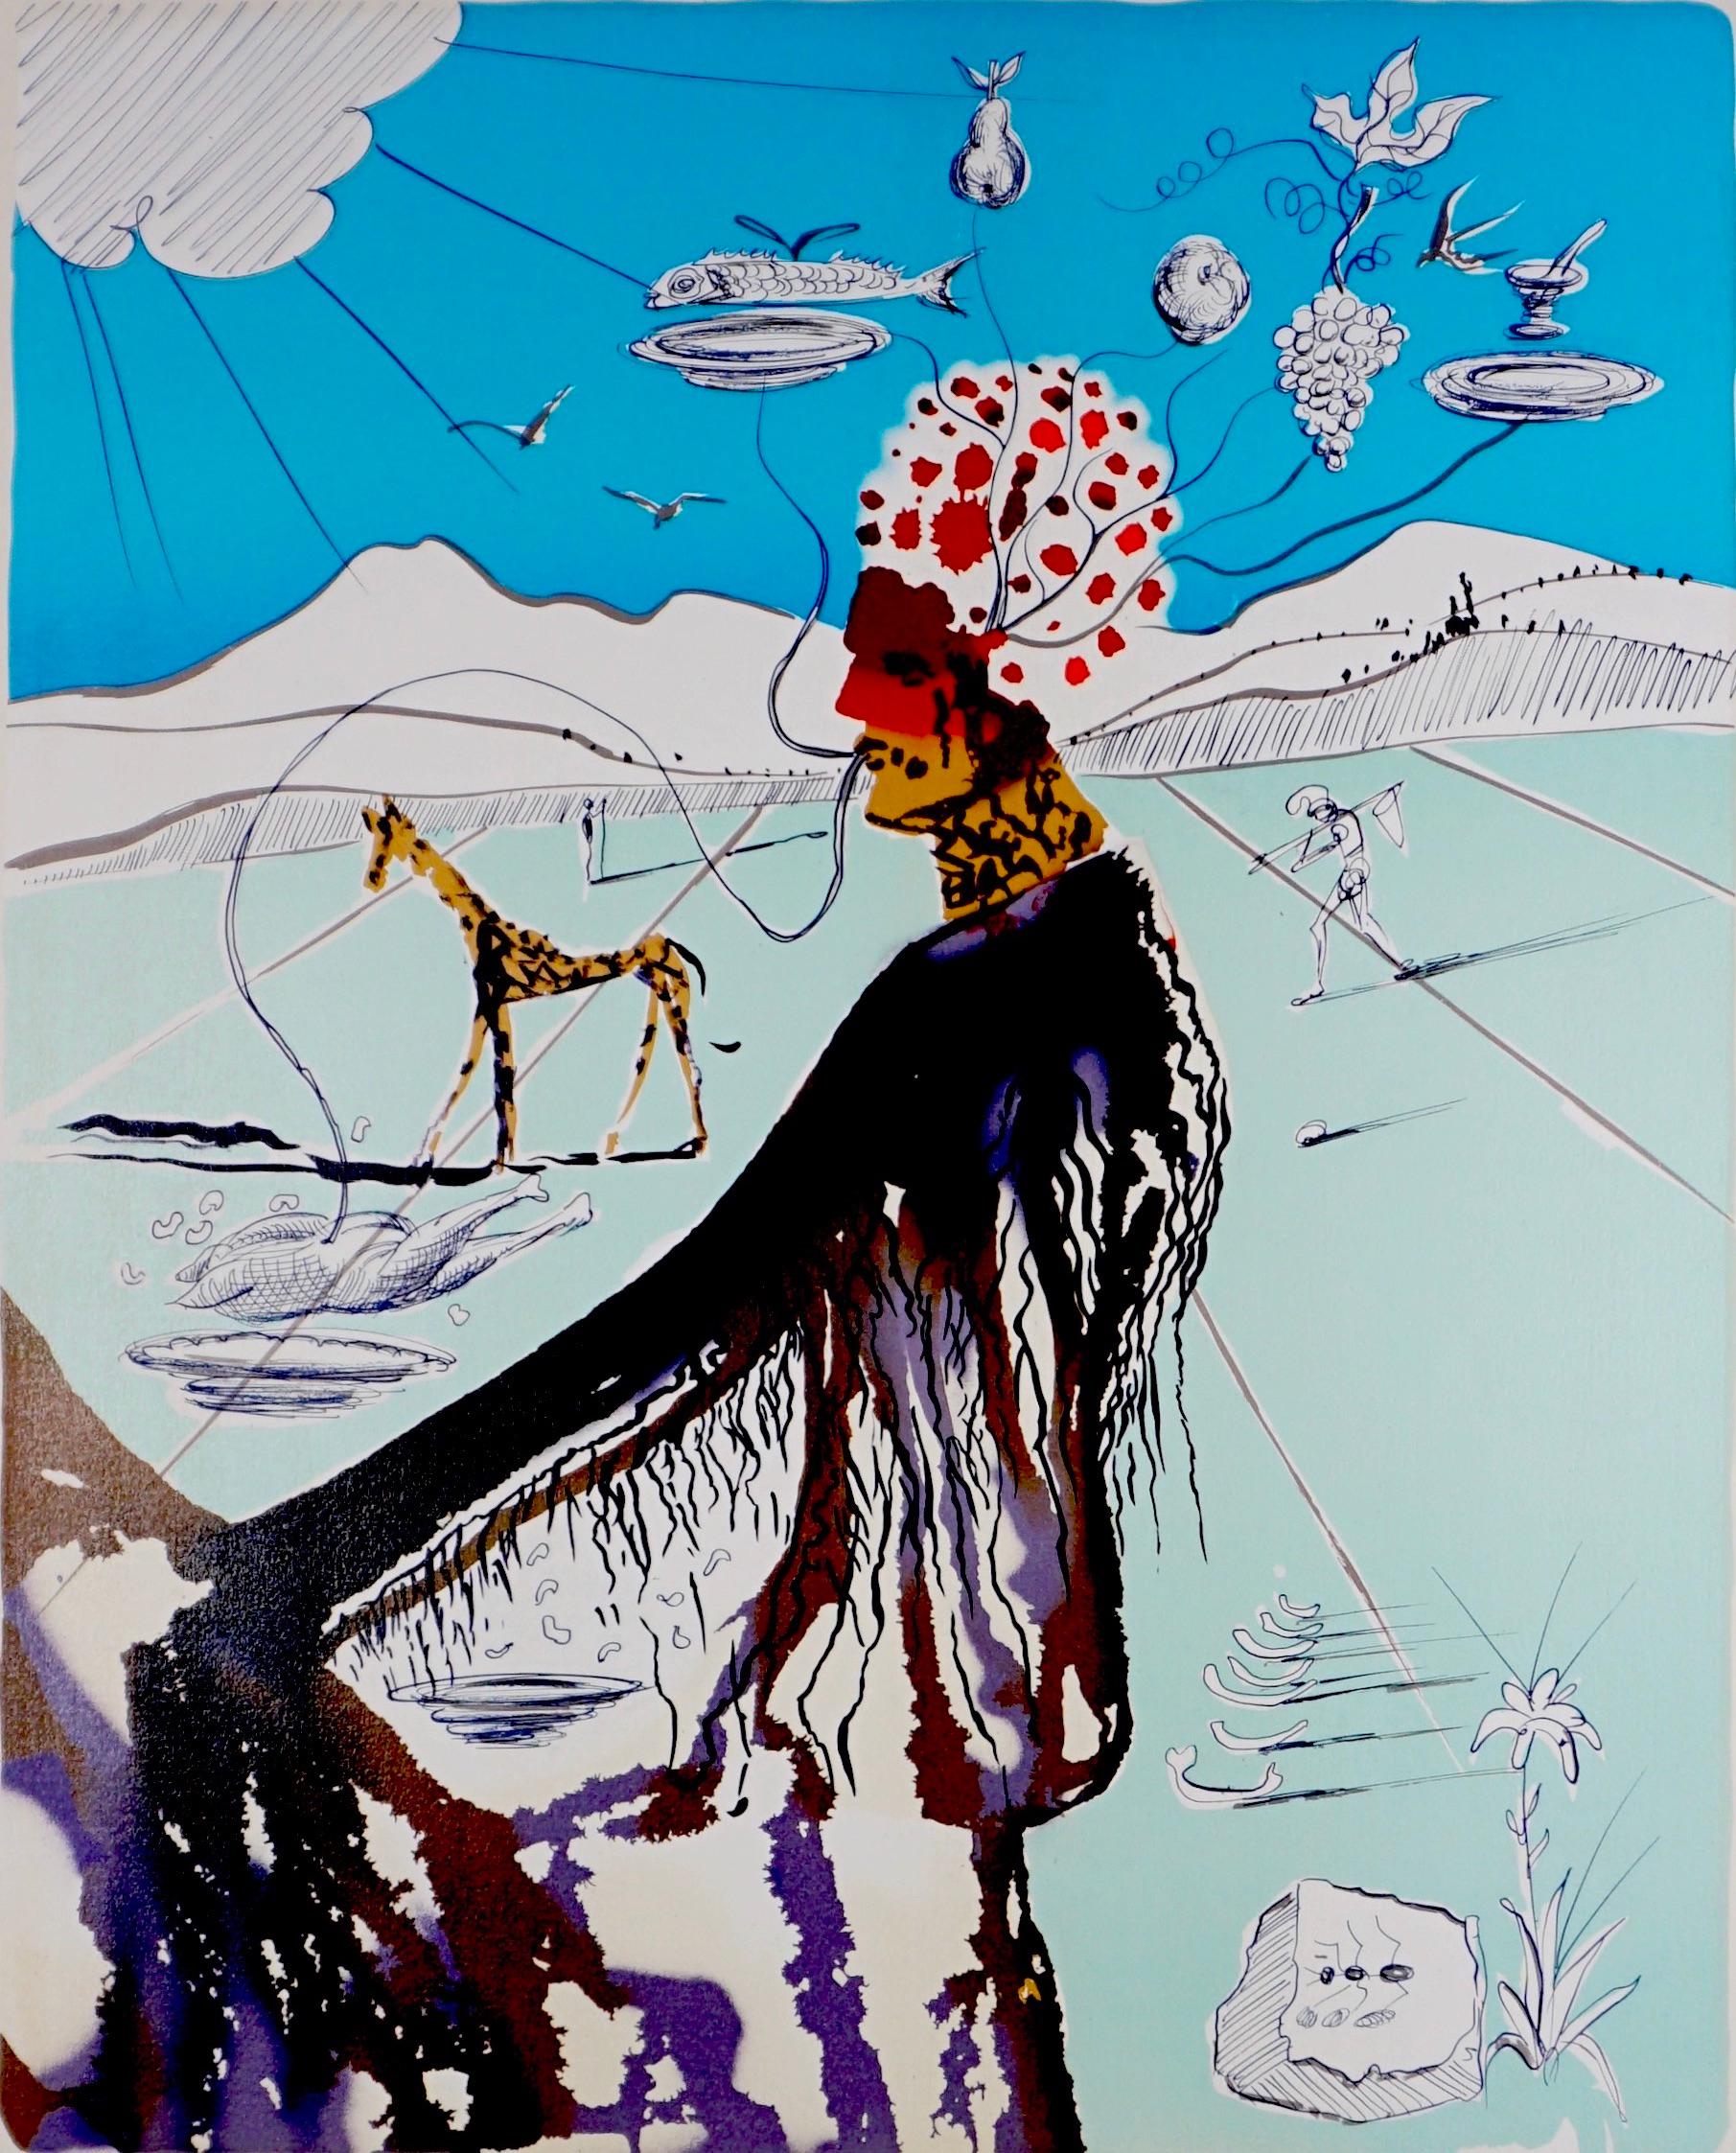 The Earth Goddess (The Chef) - Print by Salvador Dalí